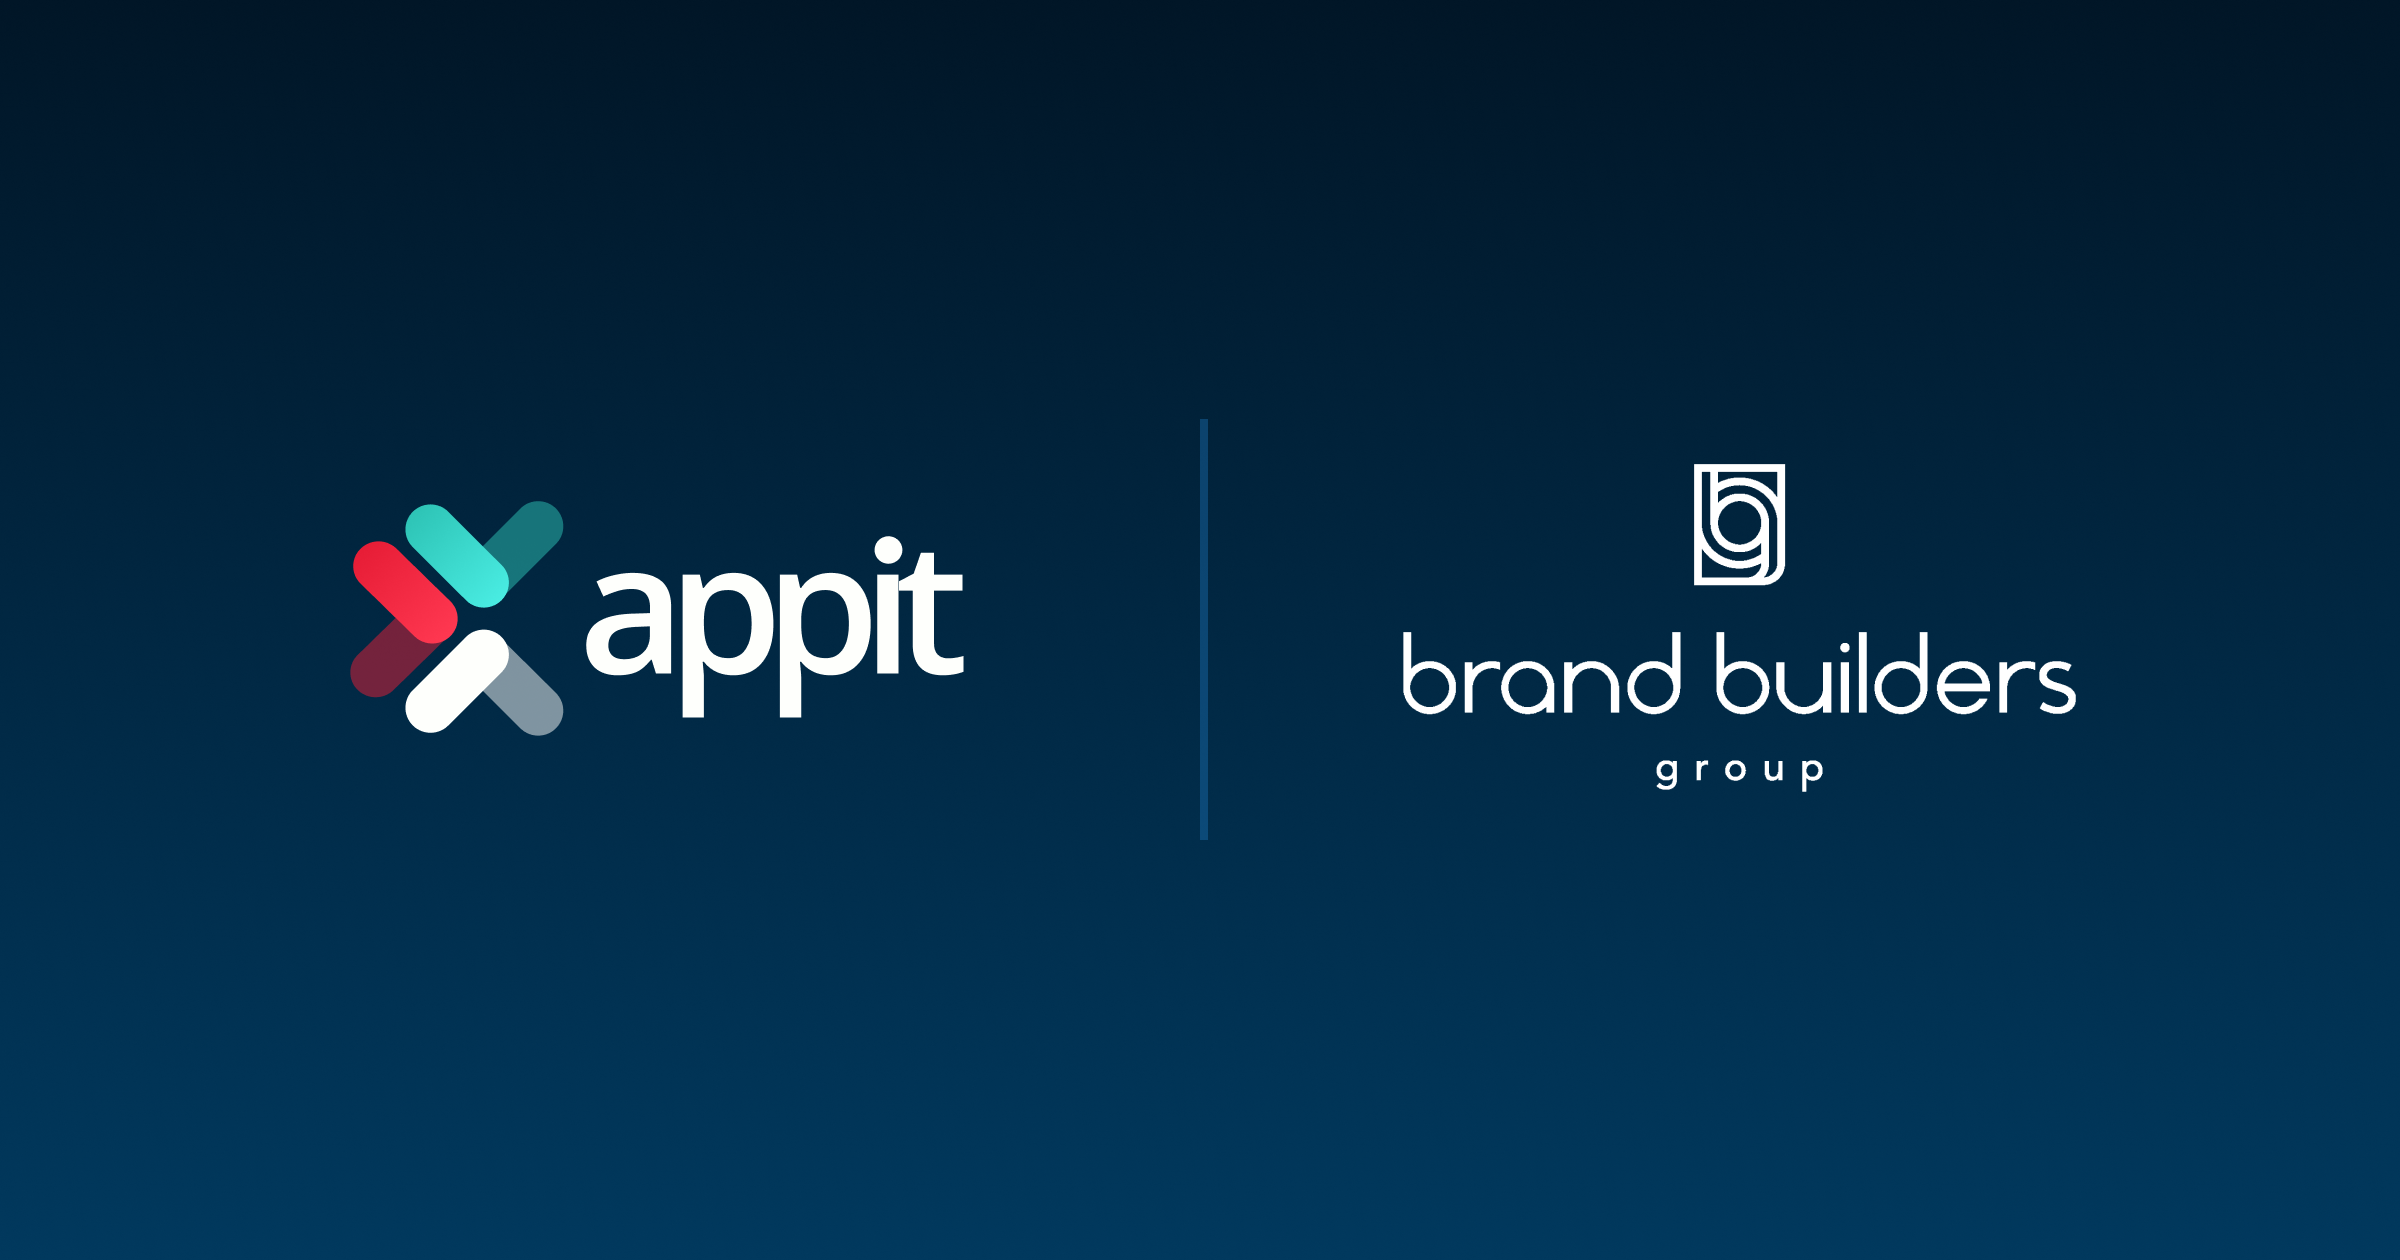 AppIt Ventures and Brand Builders Announce a Strategic Partnership to Provide Unique Value to Influencers, Thought Leaders, and Entrepreneurs